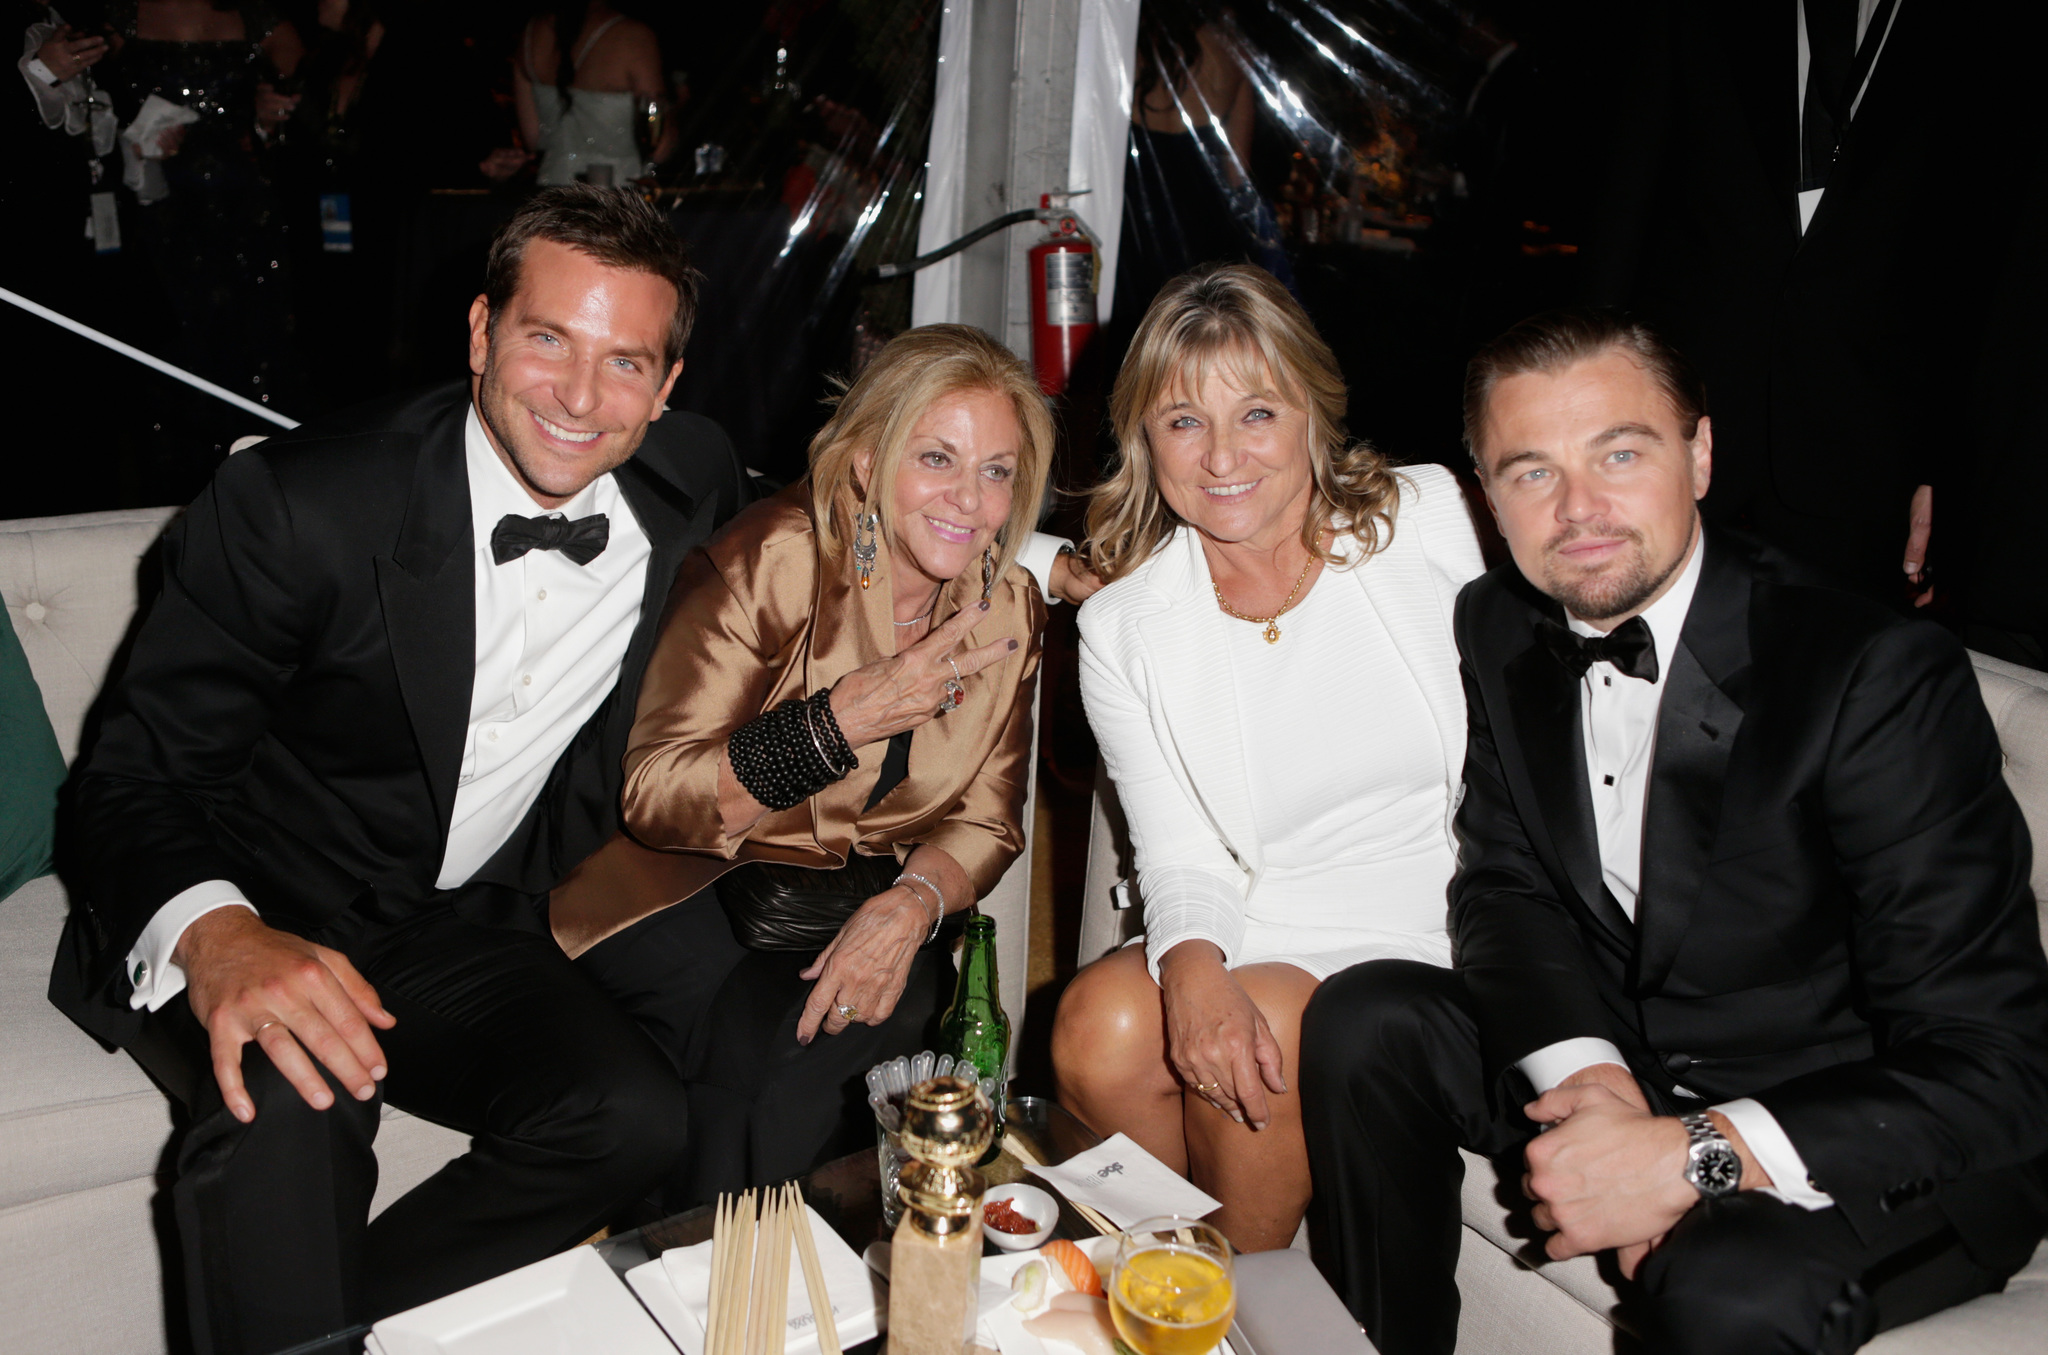 Actor Bradley Cooper, mother Gloria Campano, (R) Actor Leonardo DiCaprio, and (2nd-R) mother Irmelin Indenbirken attend The Weinstein Company & Netflix's 2014 Golden Globes After Party